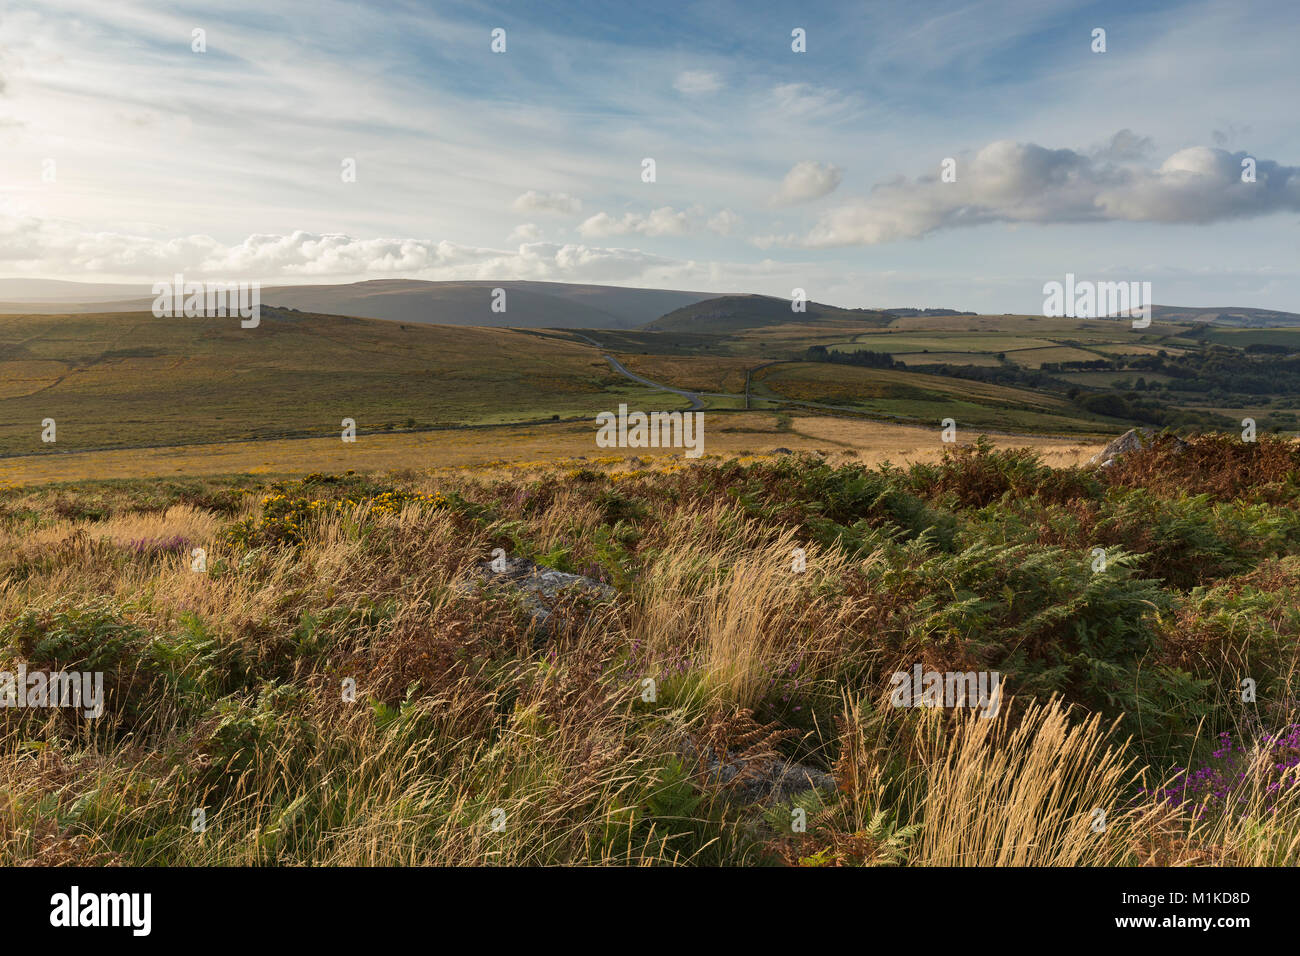 An evening shot from Rippon Tor on Dartmoor took with a slow shutter speed to emphasize the blustery wind in the grasses and plants. Stock Photo